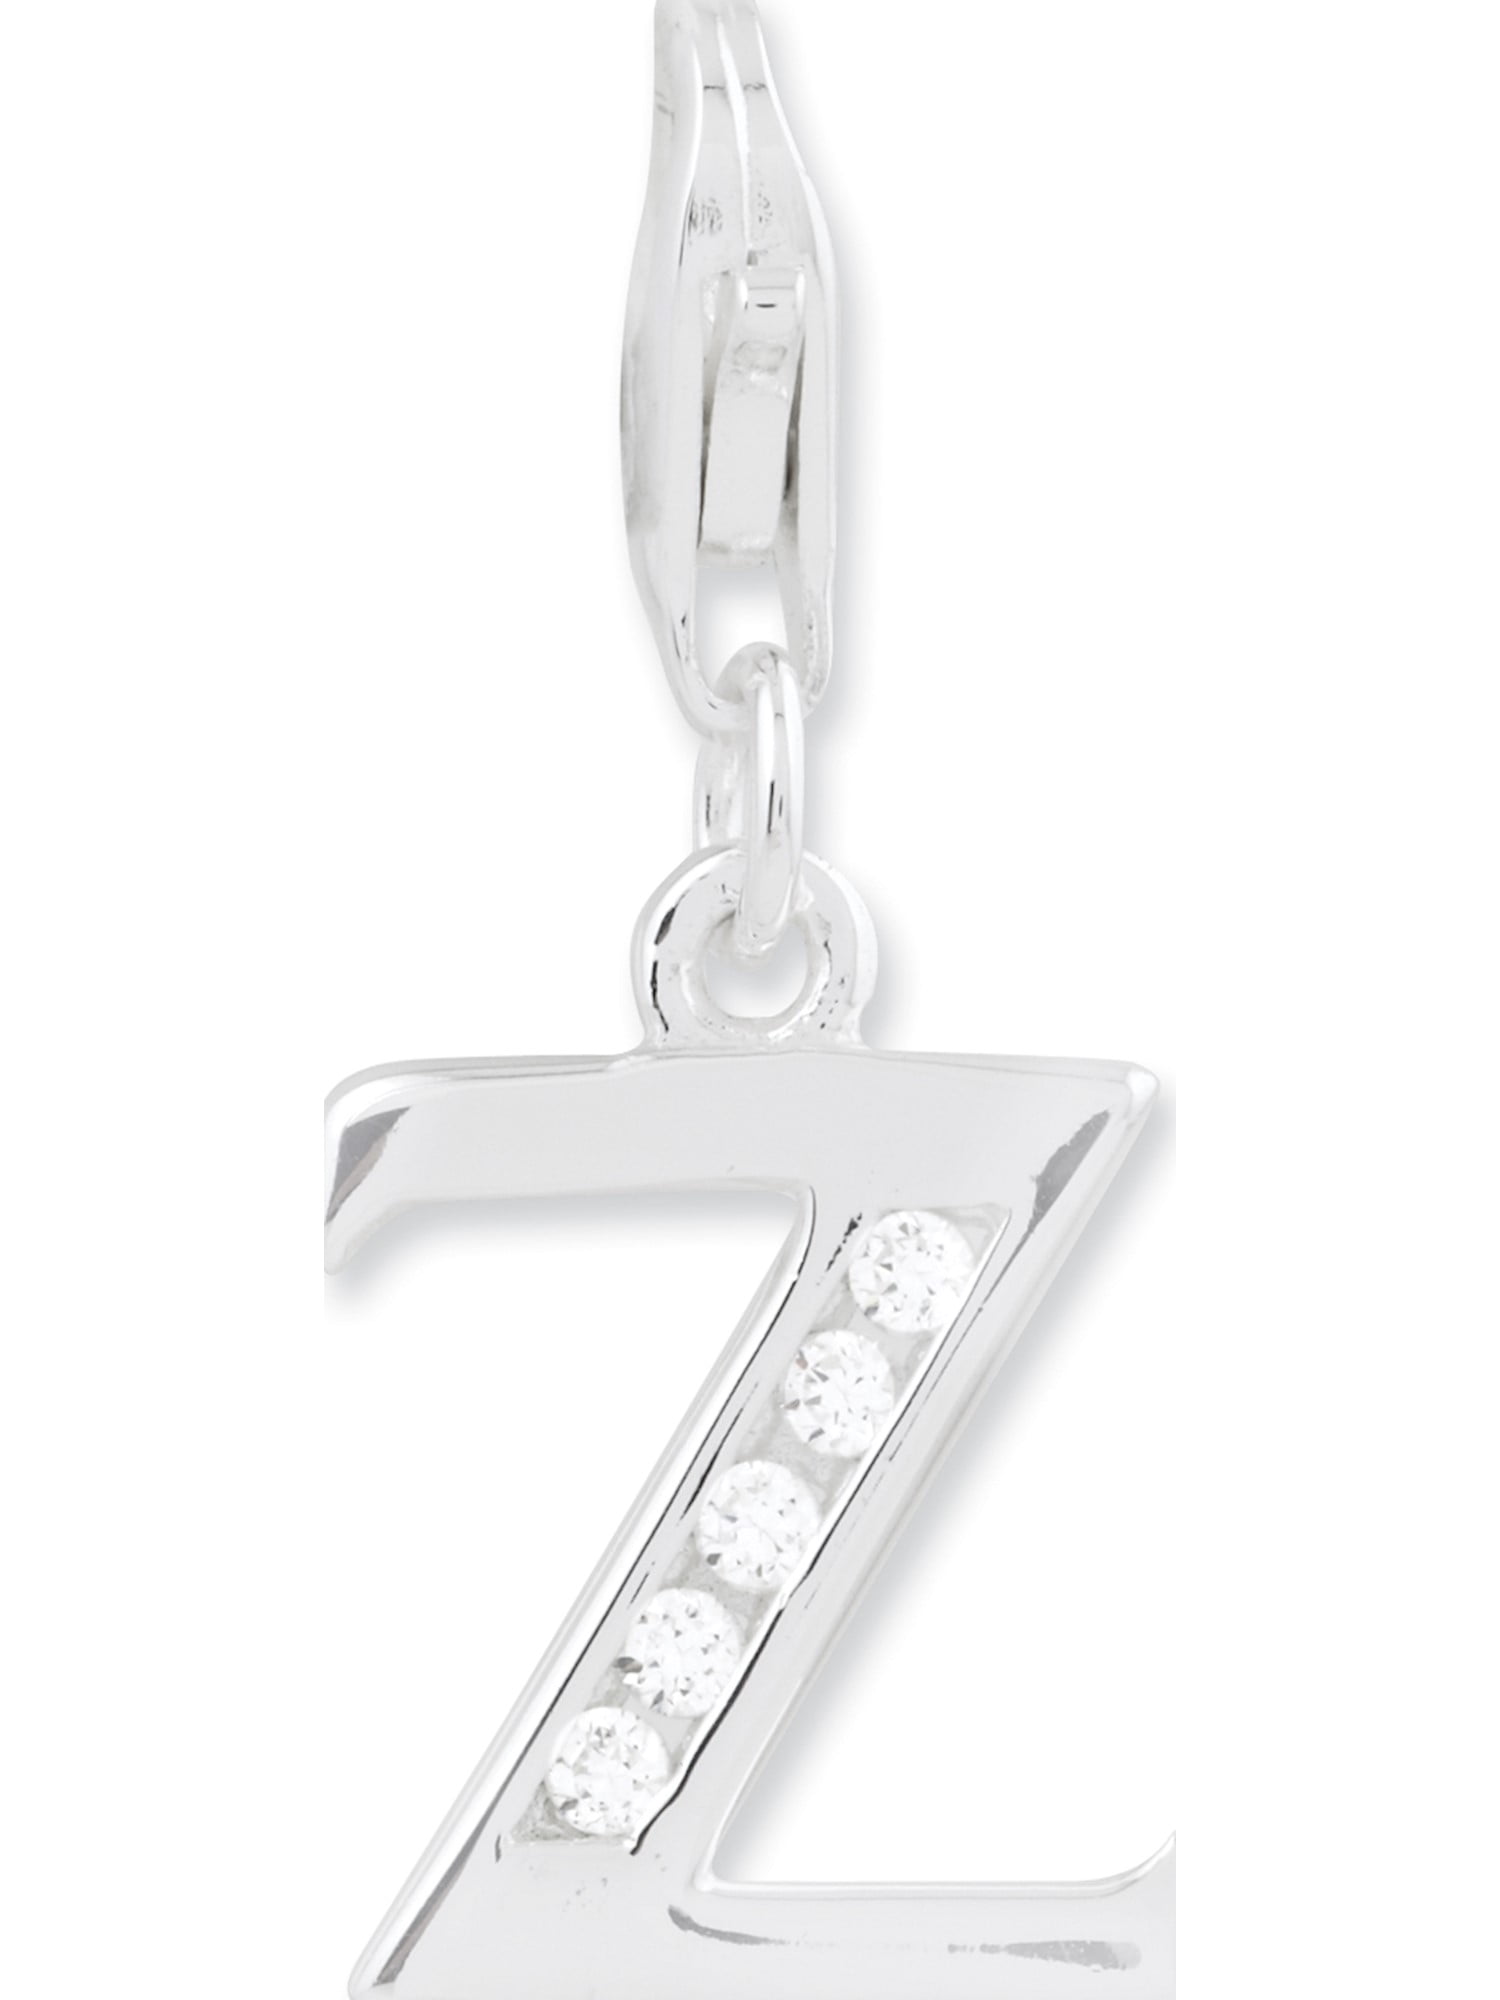 Beautiful Sterling silver 925 sterling Sterling Silver CZ Letter Z w/Lobster Clasp Charm